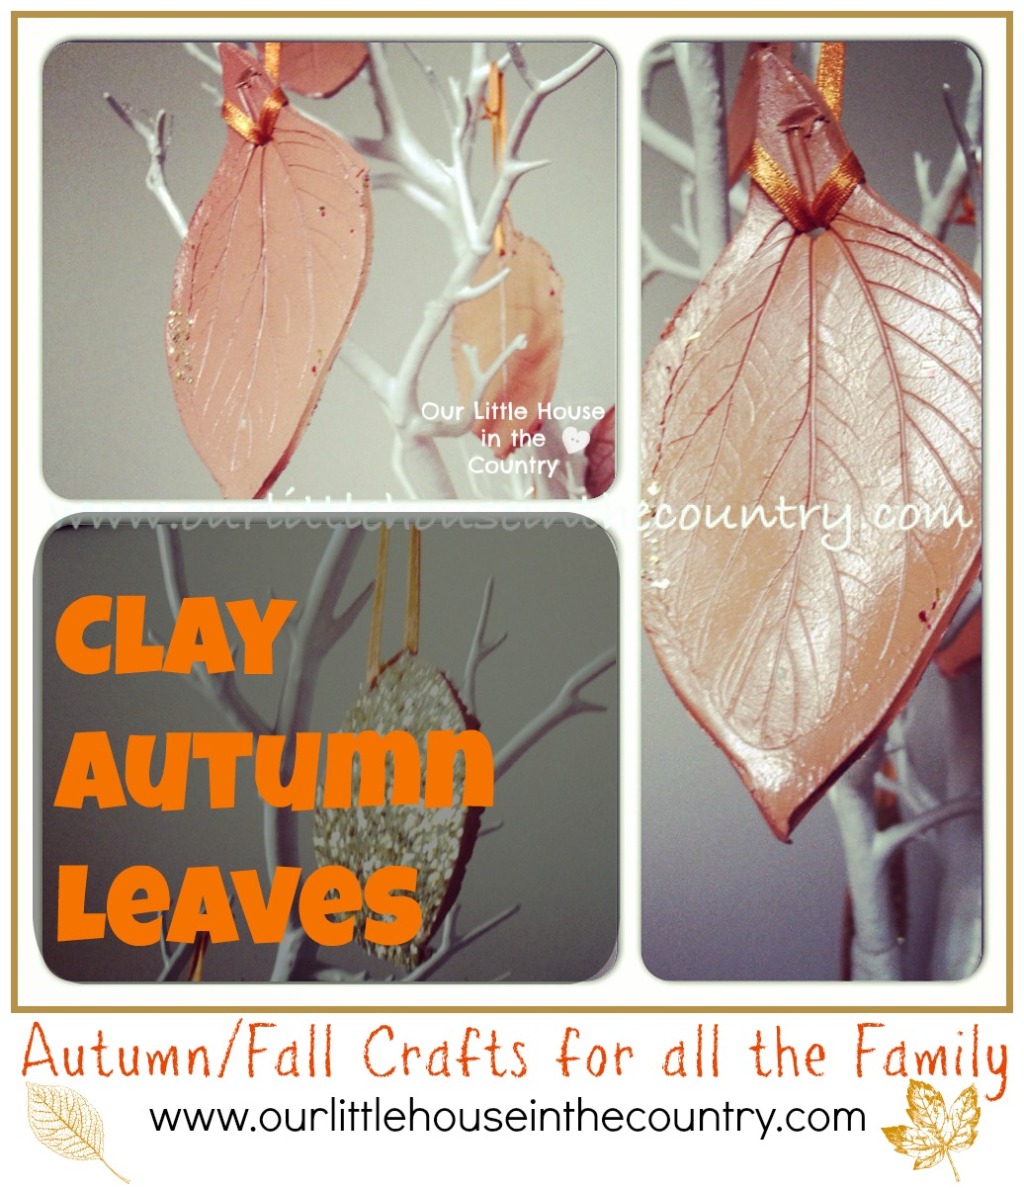 Clay Autumn Leaves – Fall Crafts for Kids